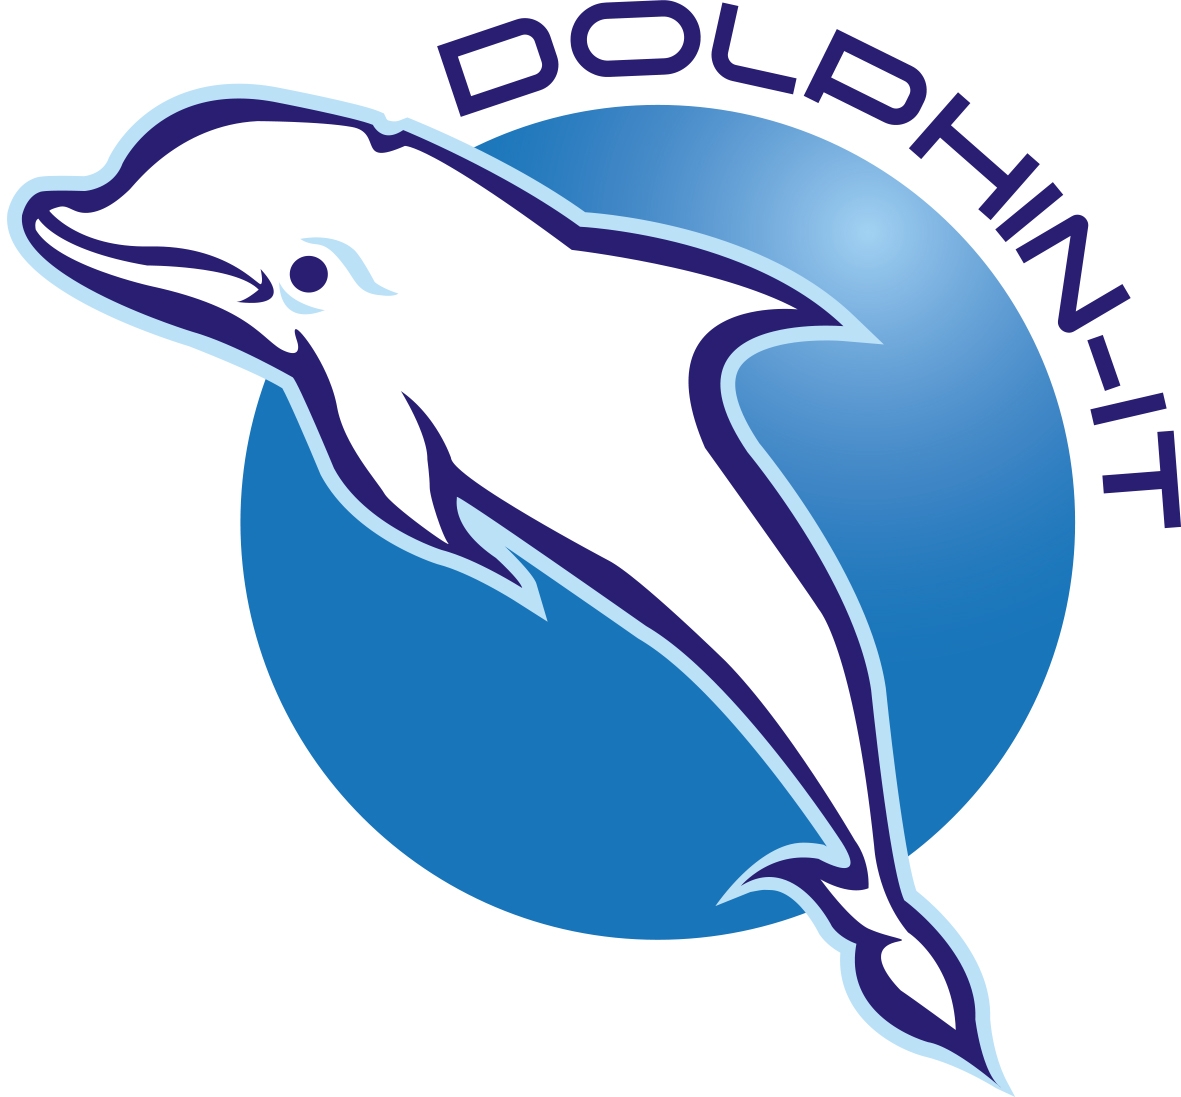 Main photo for Dolphin IT Support & Consulting Services LTD